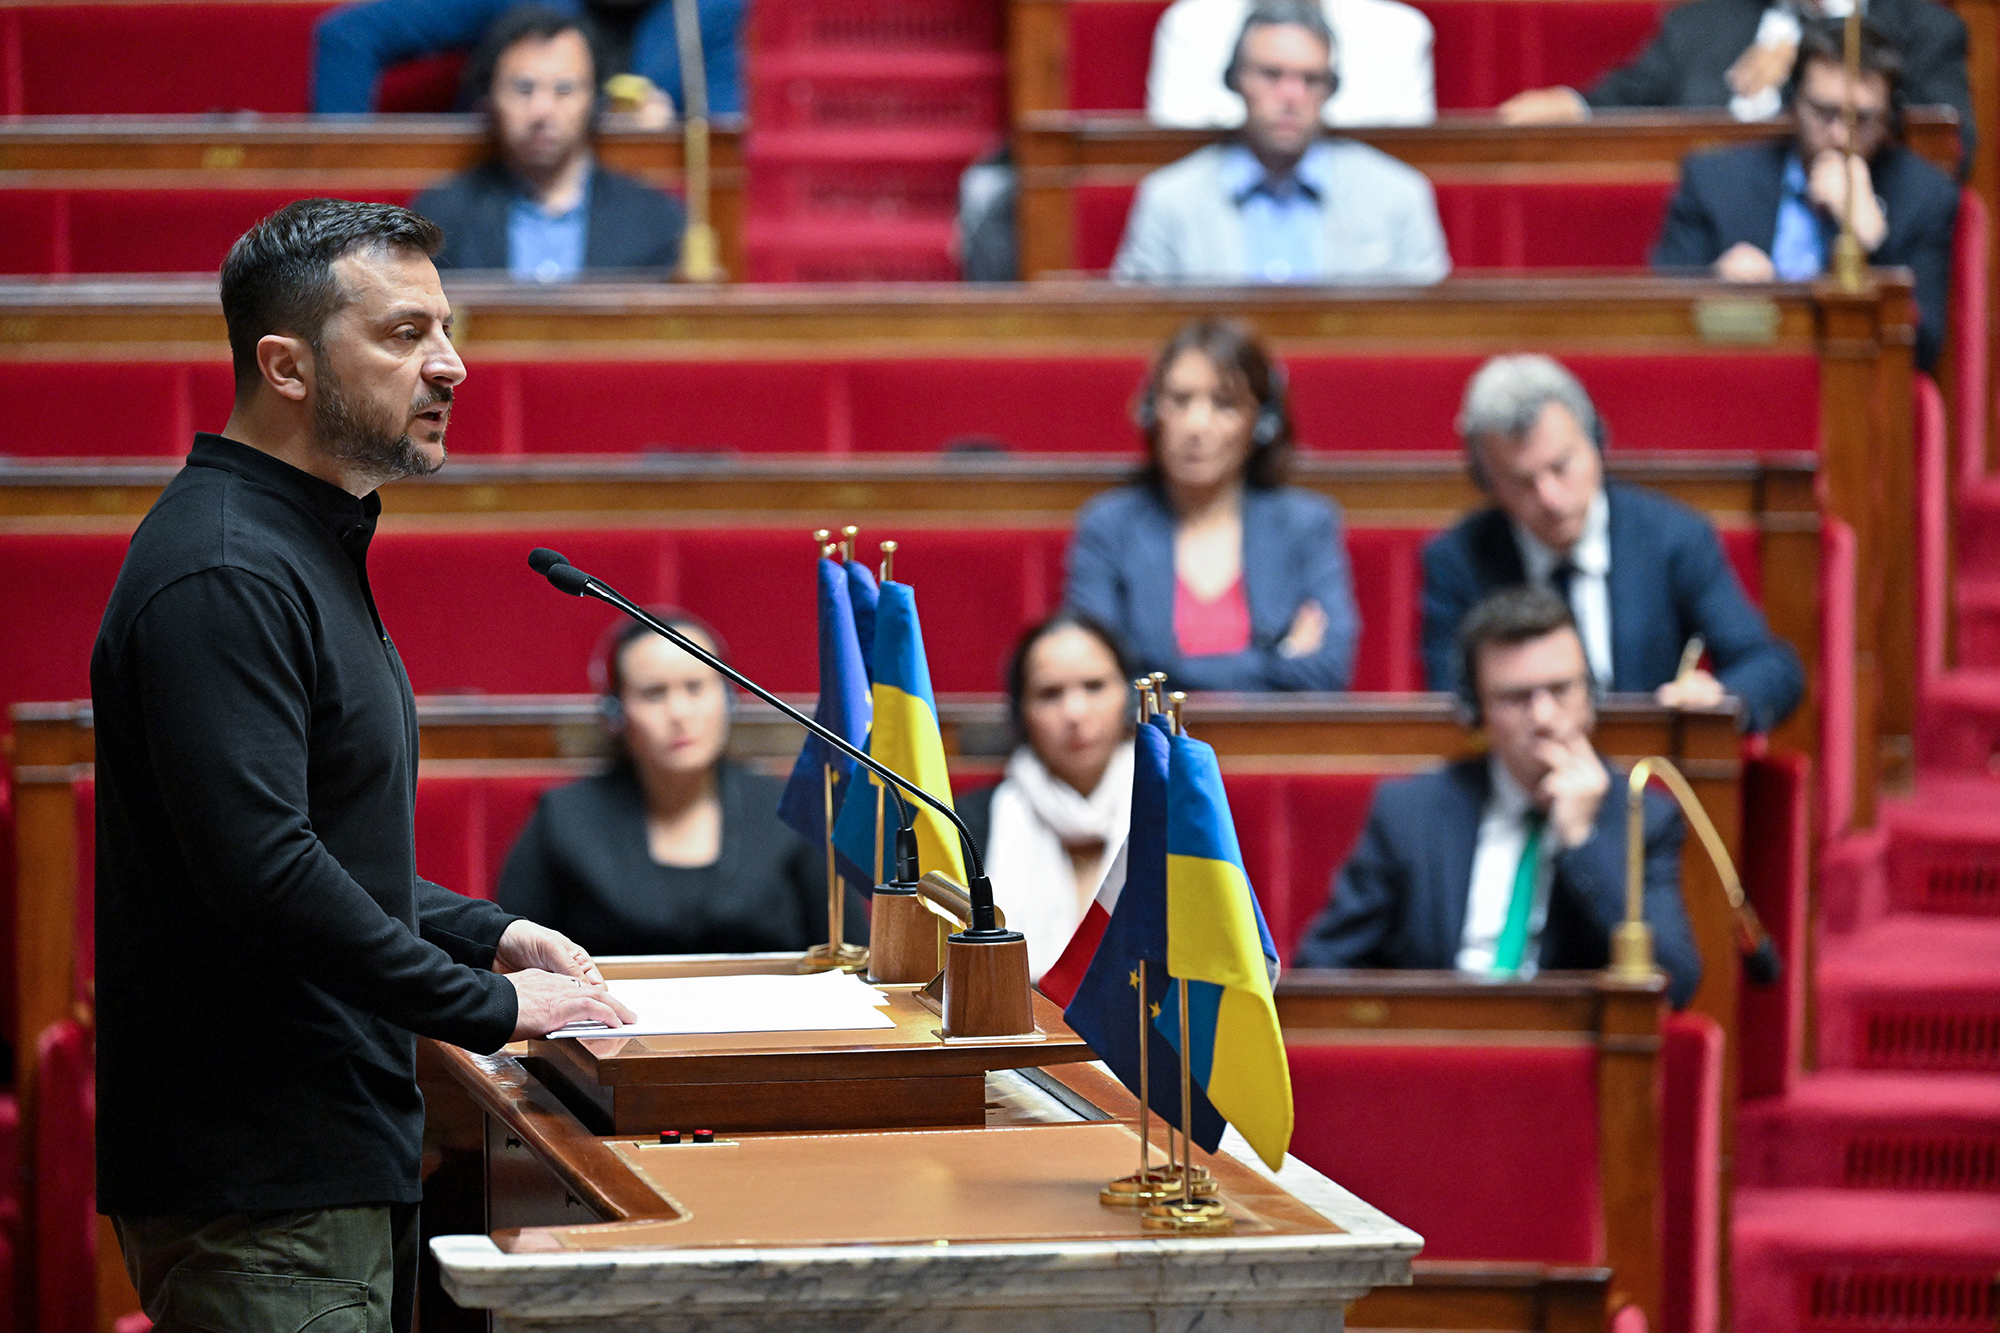 Ukrainian President Volodymyr Zelensky gives a speech on the stand at the French National Assembly in Paris, France on June 7.